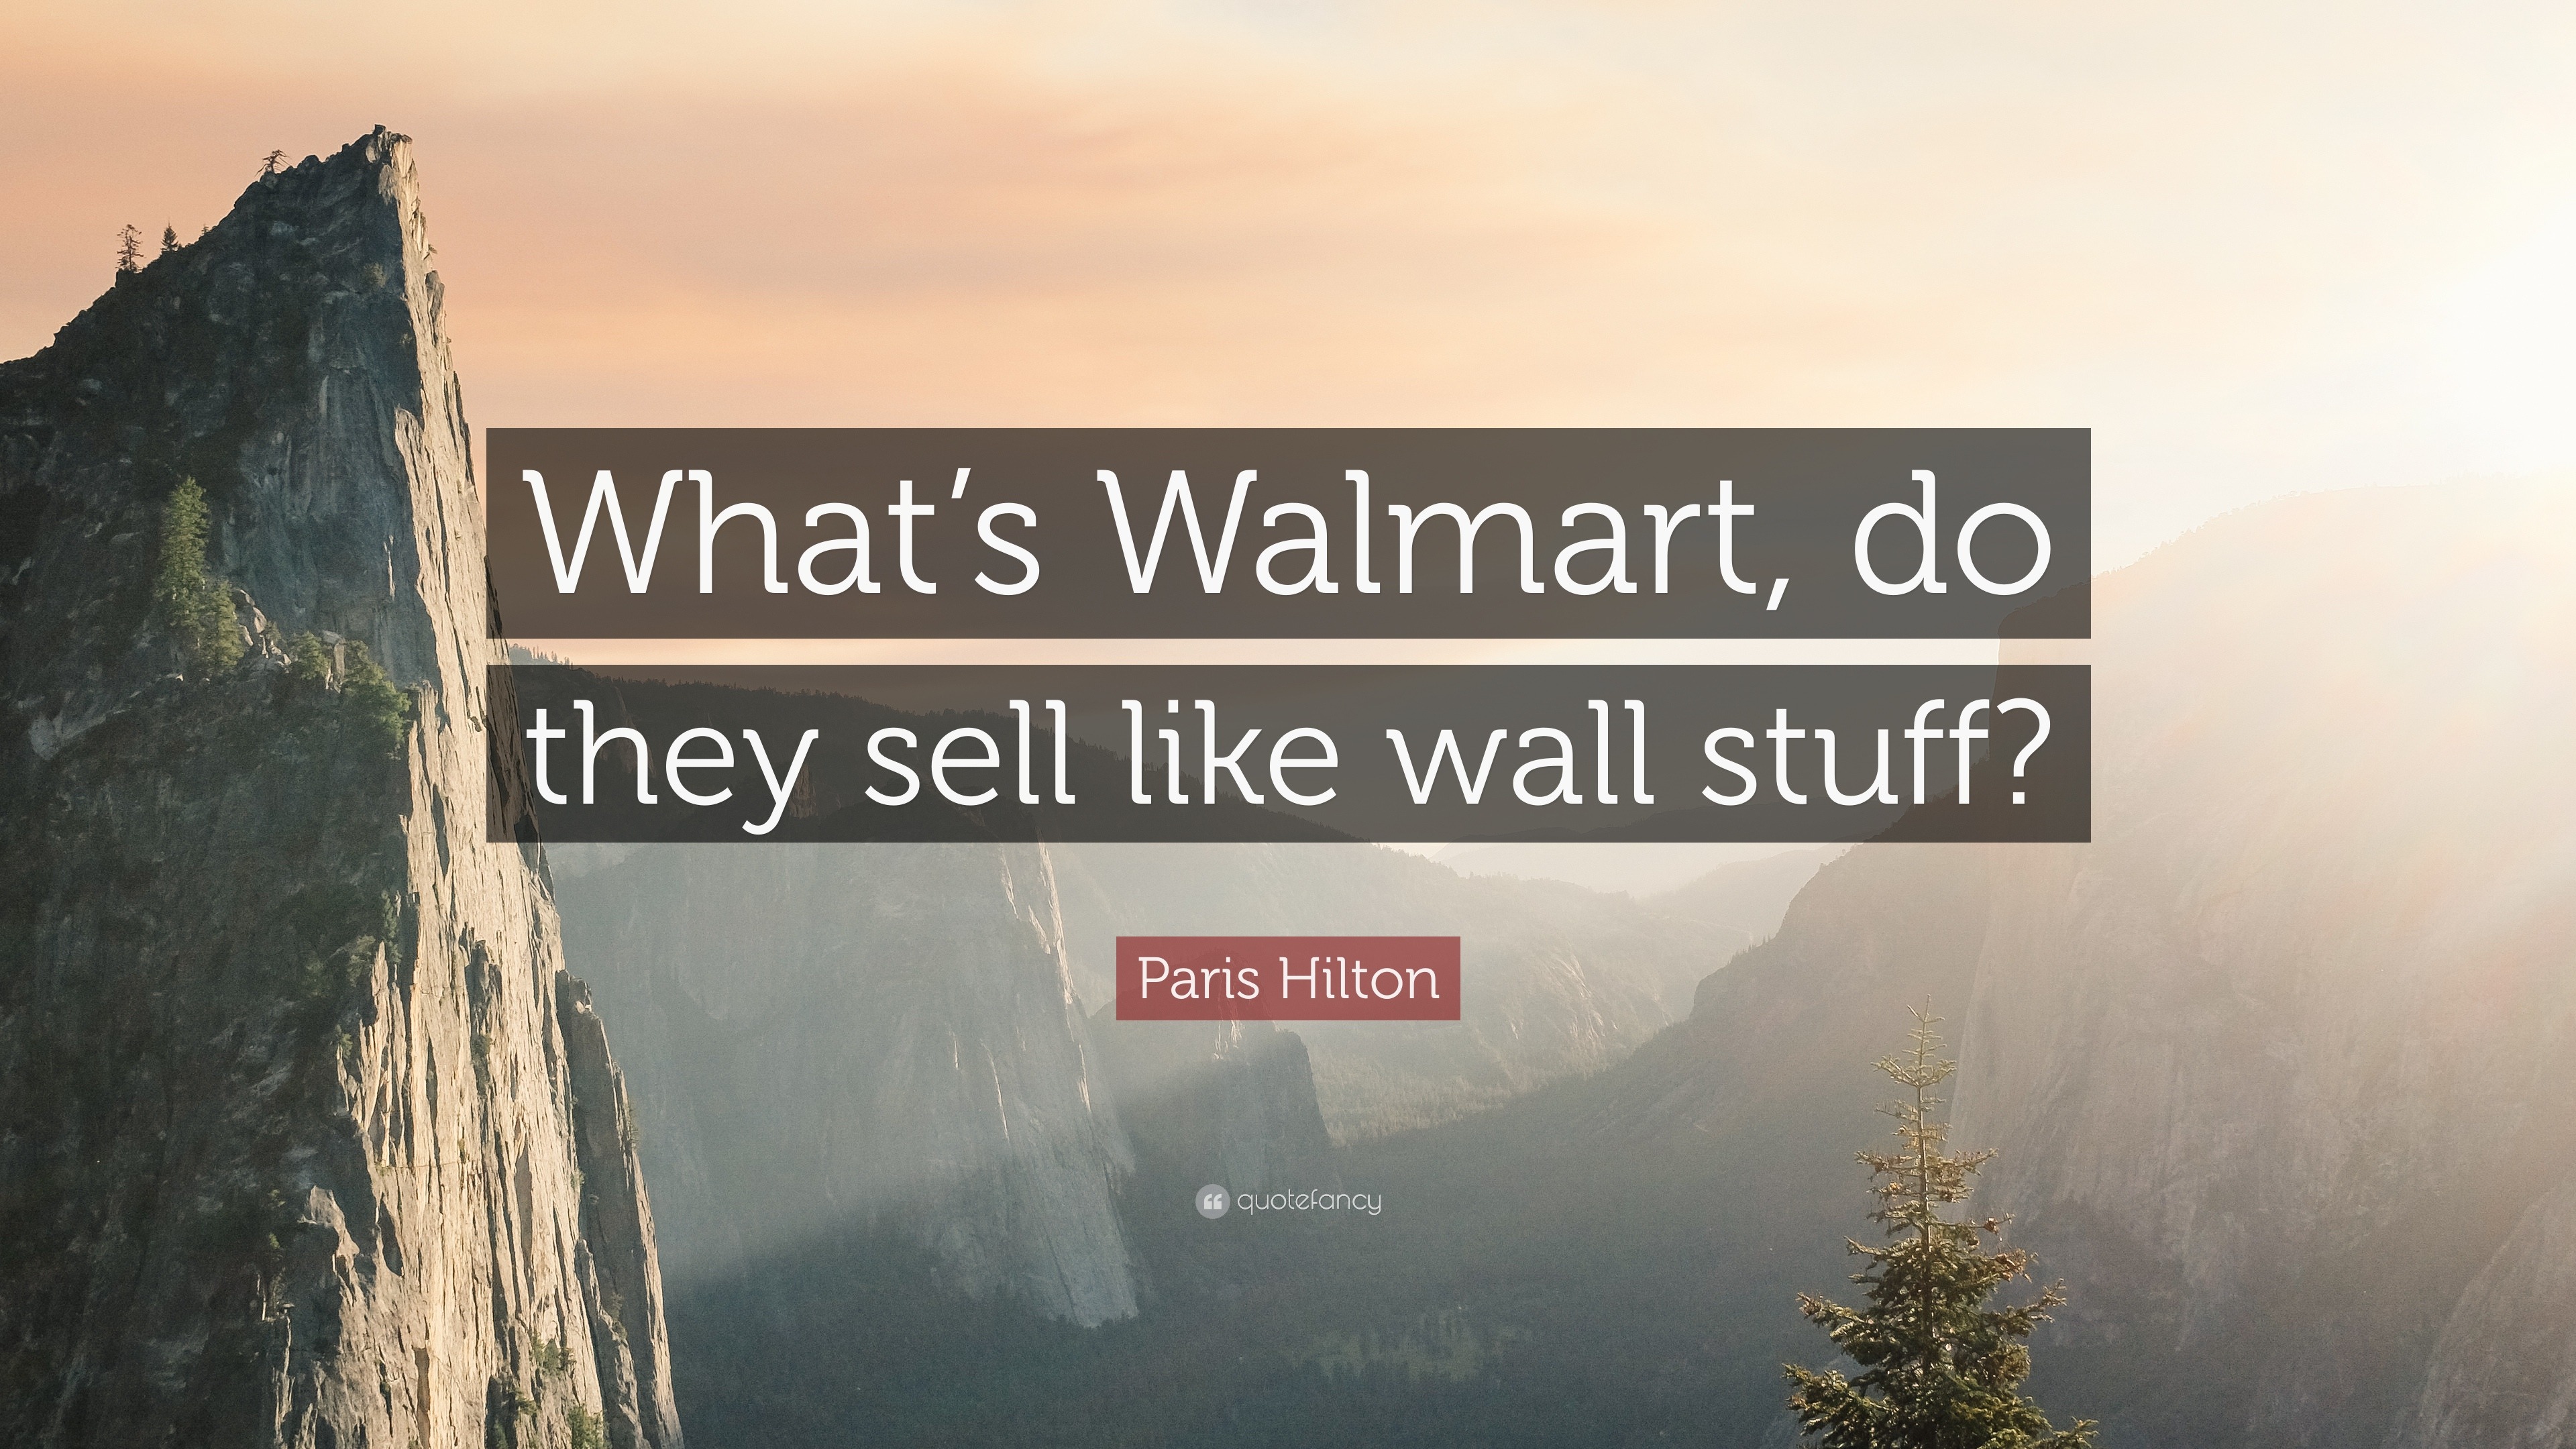 https://quotefancy.com/media/wallpaper/3840x2160/378432-Paris-Hilton-Quote-What-s-Walmart-do-they-sell-like-wall-stuff.jpg